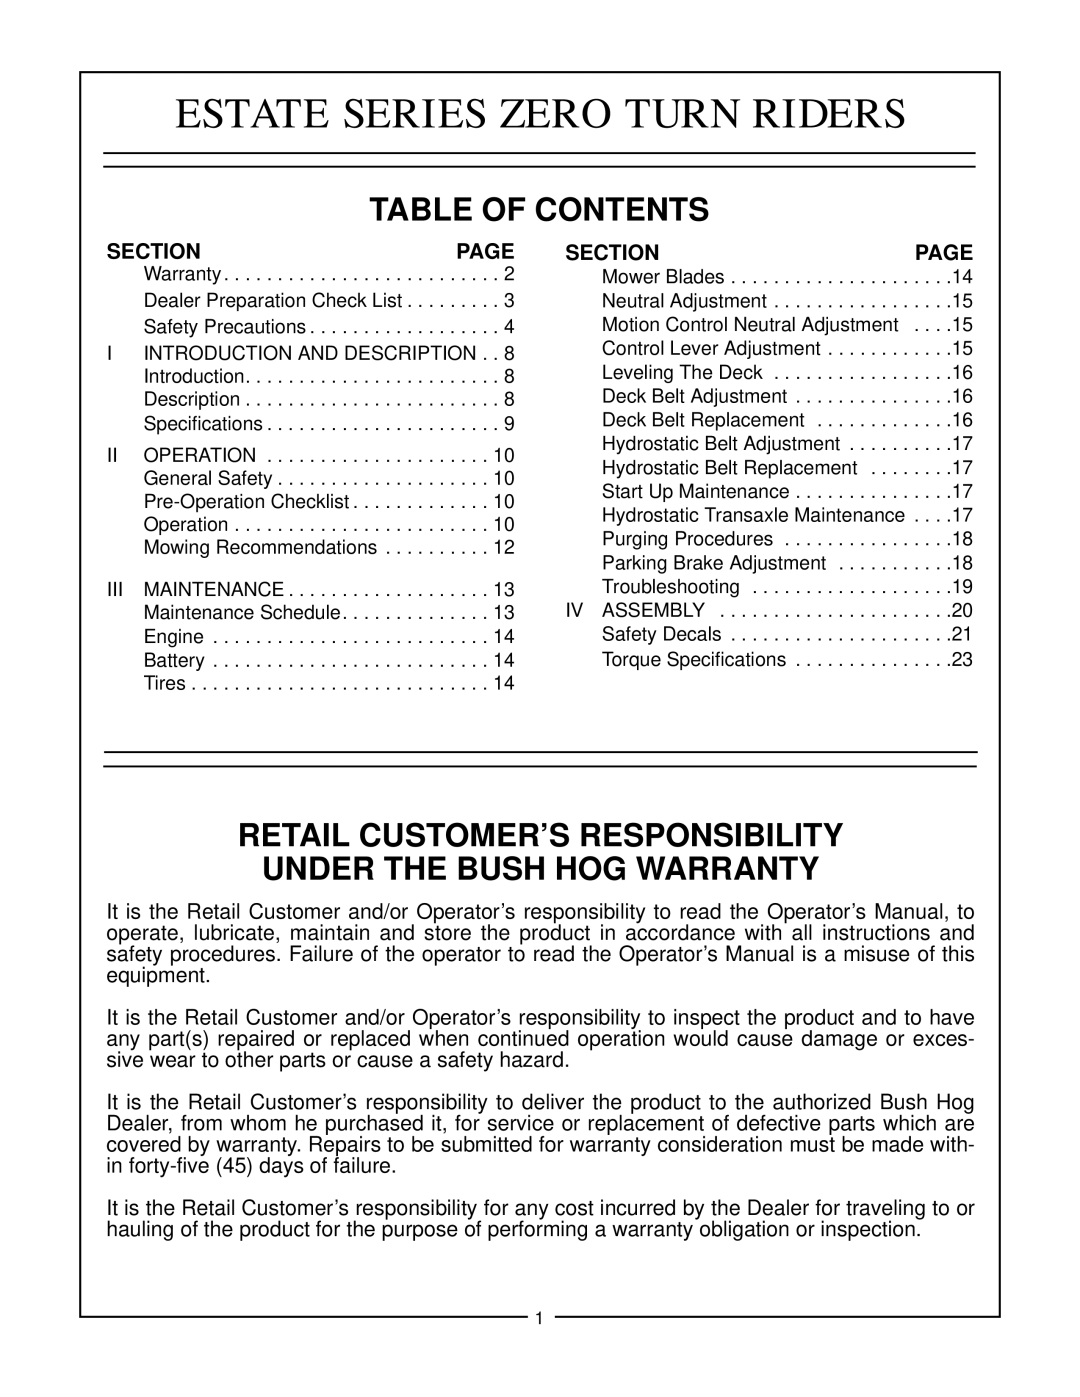 Bush Hog Estate Series manual Table Of Contents, Retail Customer’S Responsibility, Under The Bush Hog Warranty, Section 